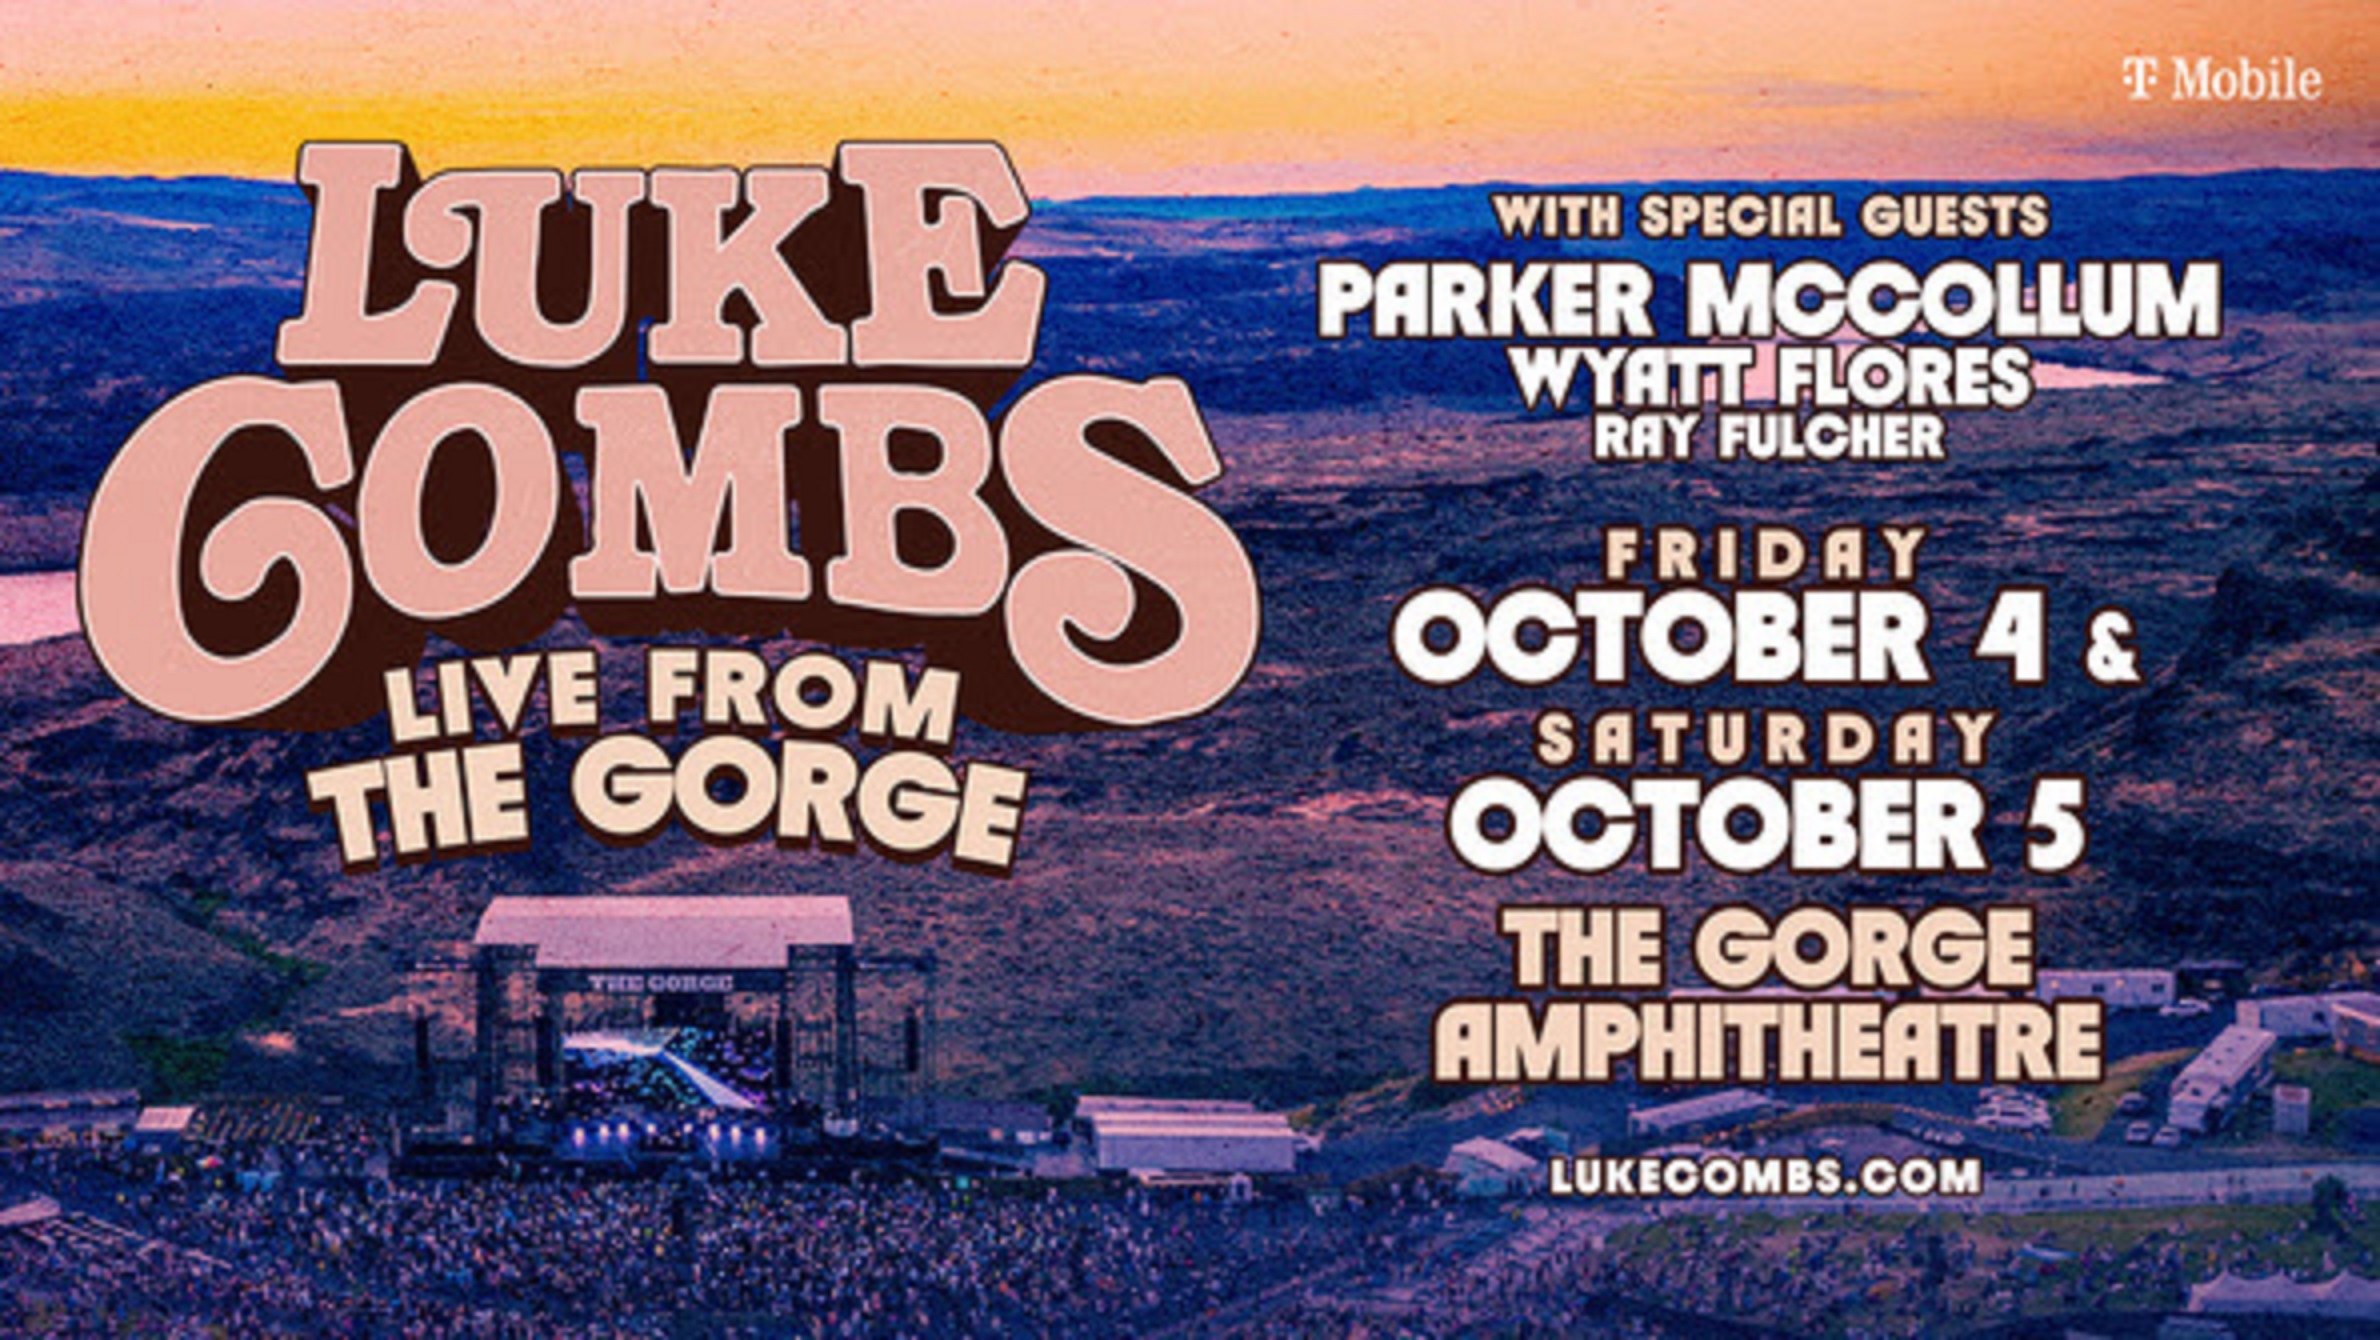 Luke Combs confirms two shows at the Gorge Amphitheatre on October 4 and 5